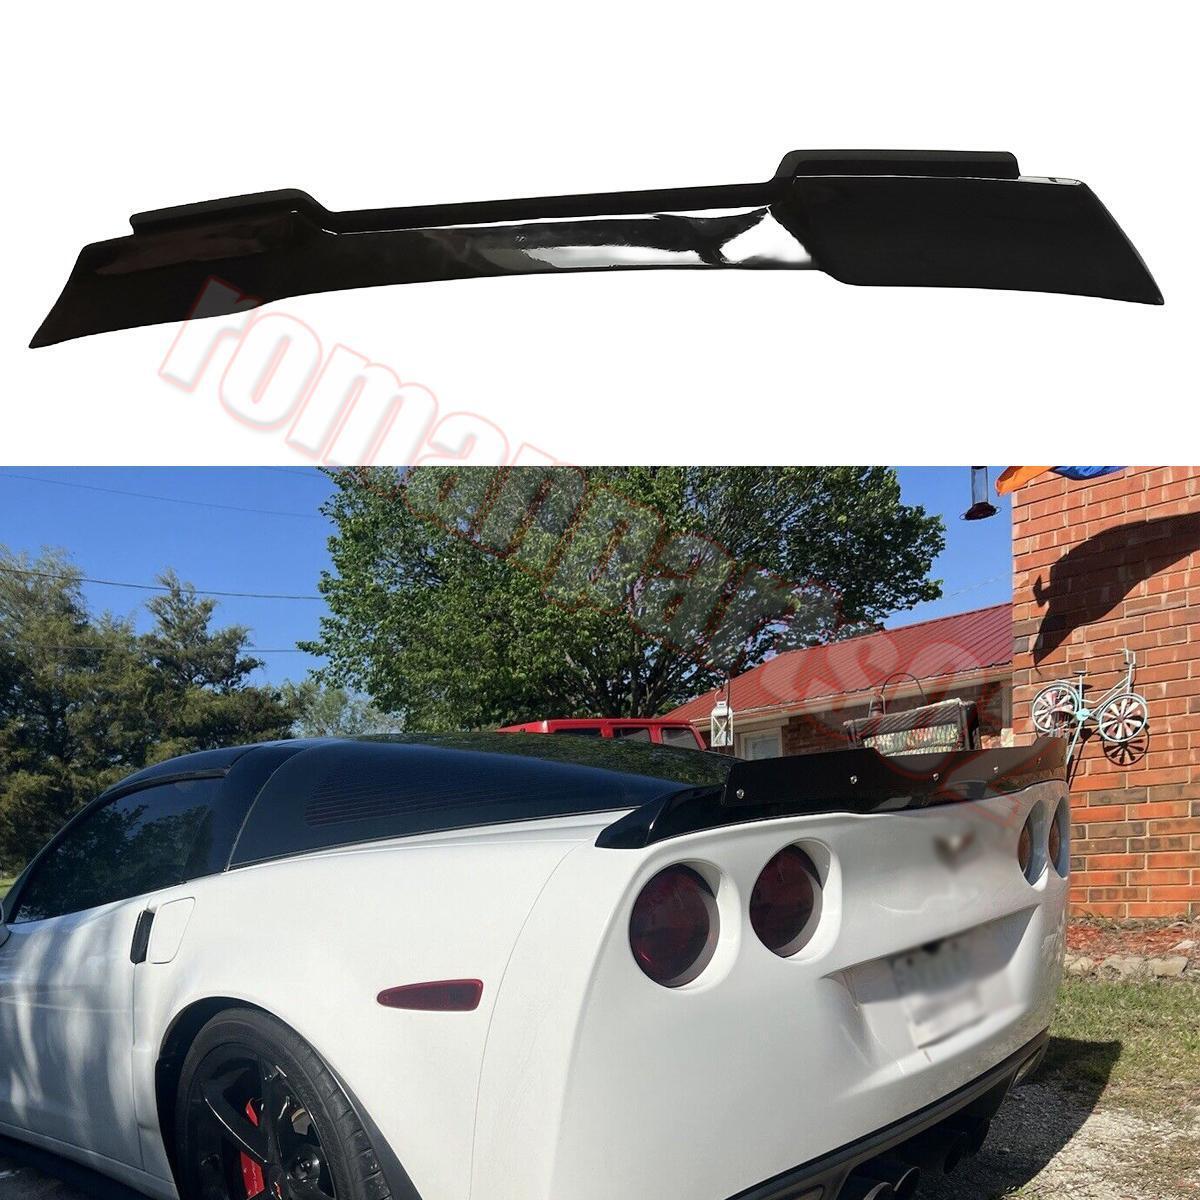 Glossy Black Rear Trunk Wing Spoiler Fits for 2005-2013 Corvette C6 ZR1 H Style